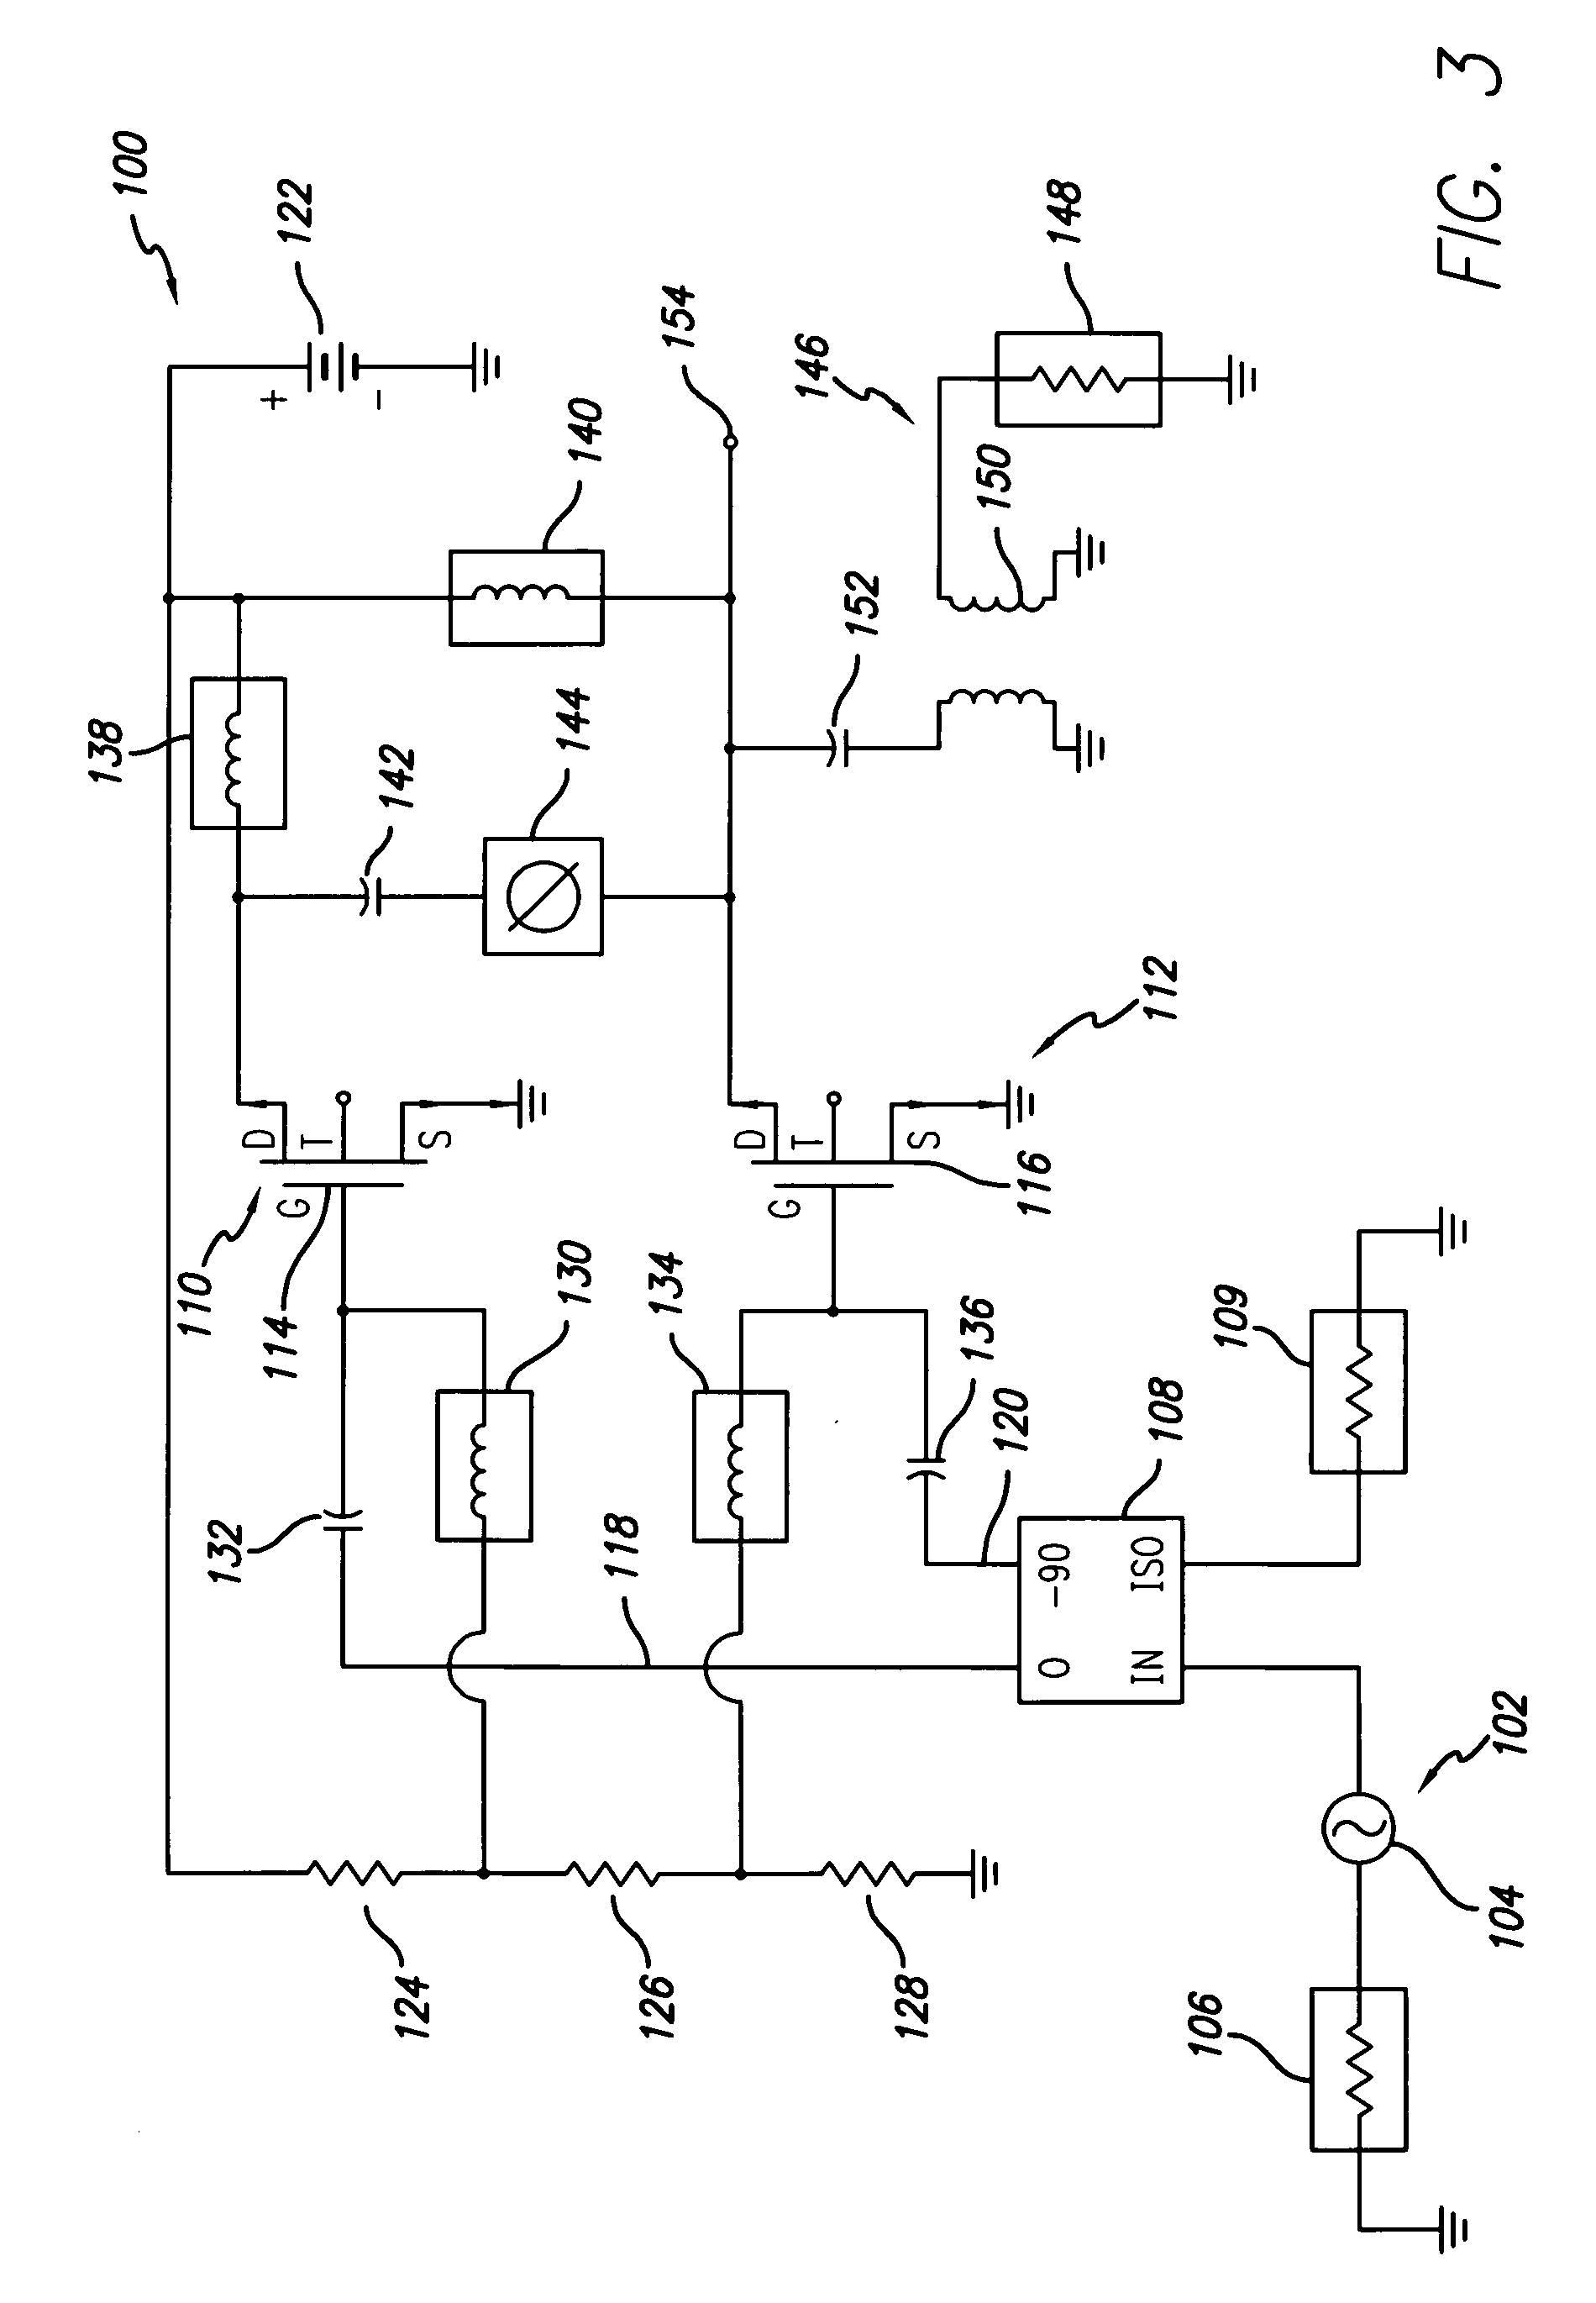 RF amplifier employing active load linearization